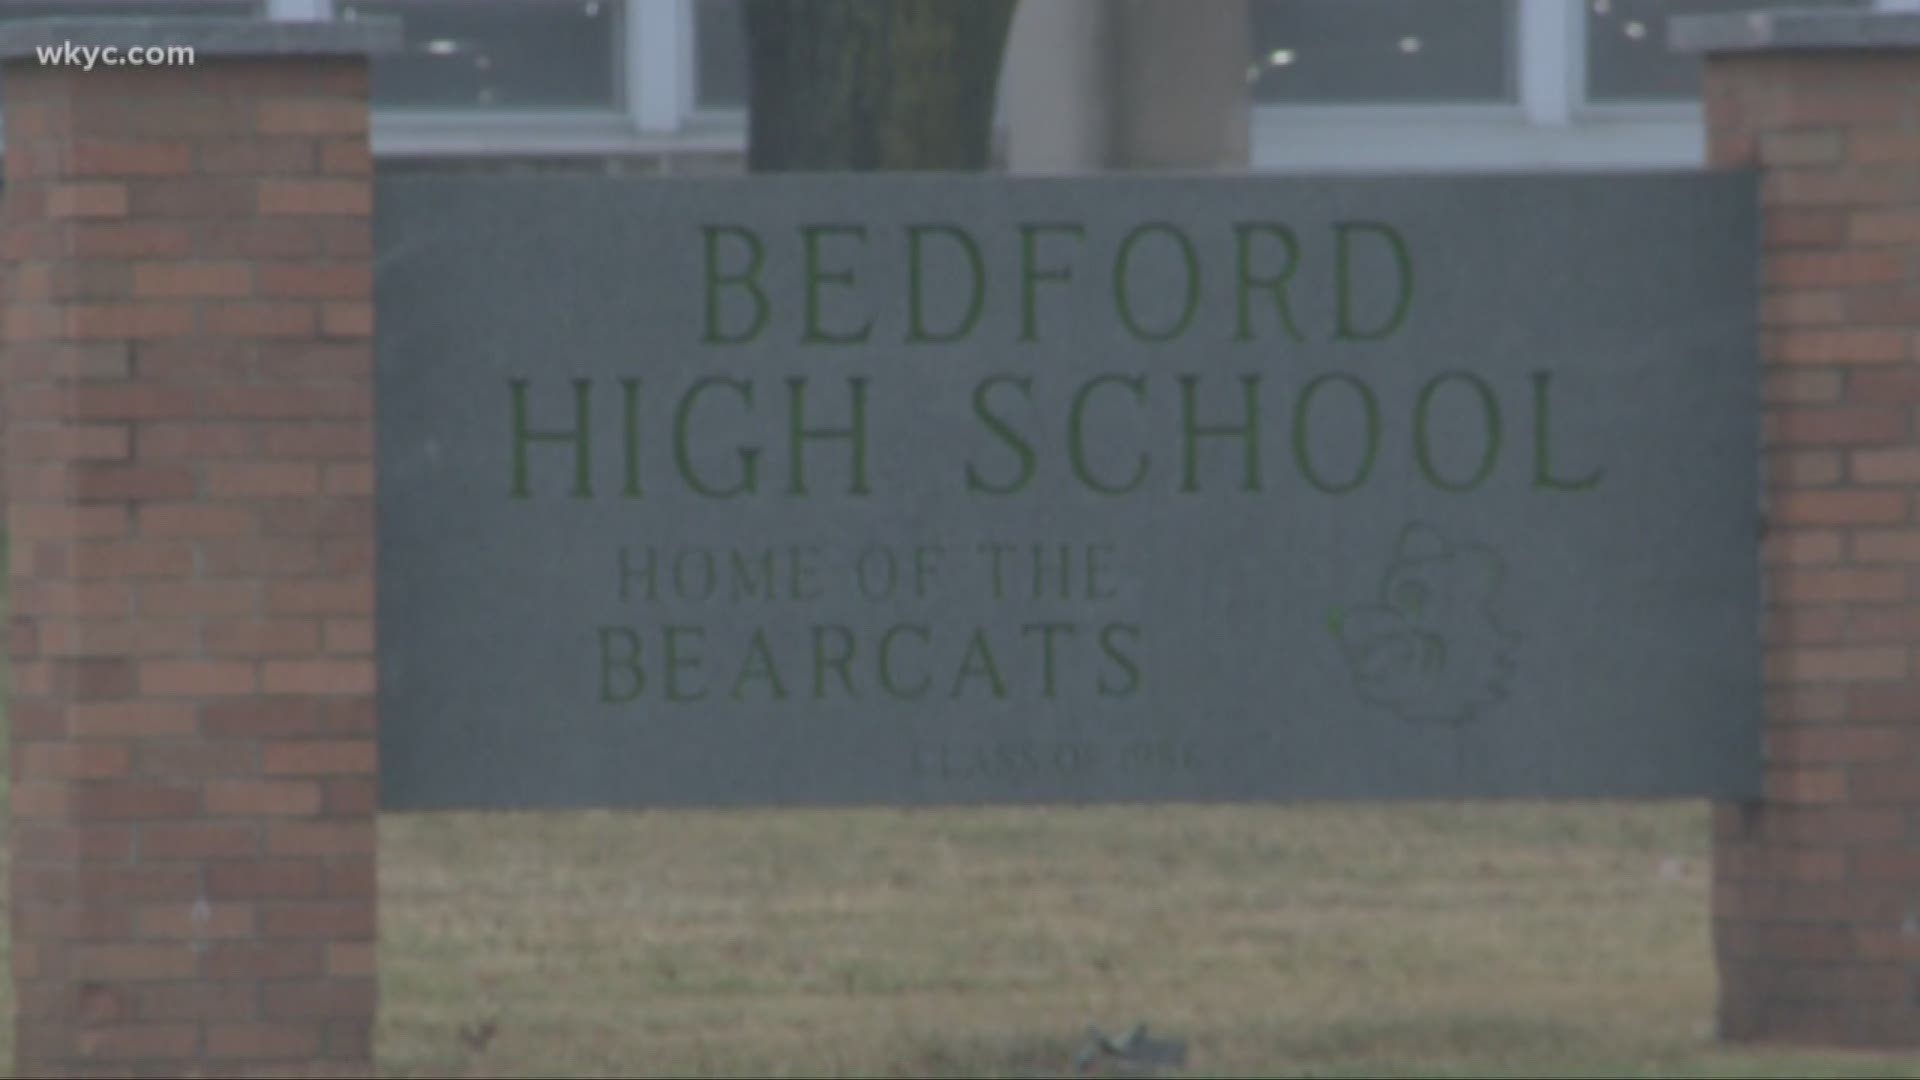 Bedford football coach Sean Williams indicted for alleged sexual relationship with student